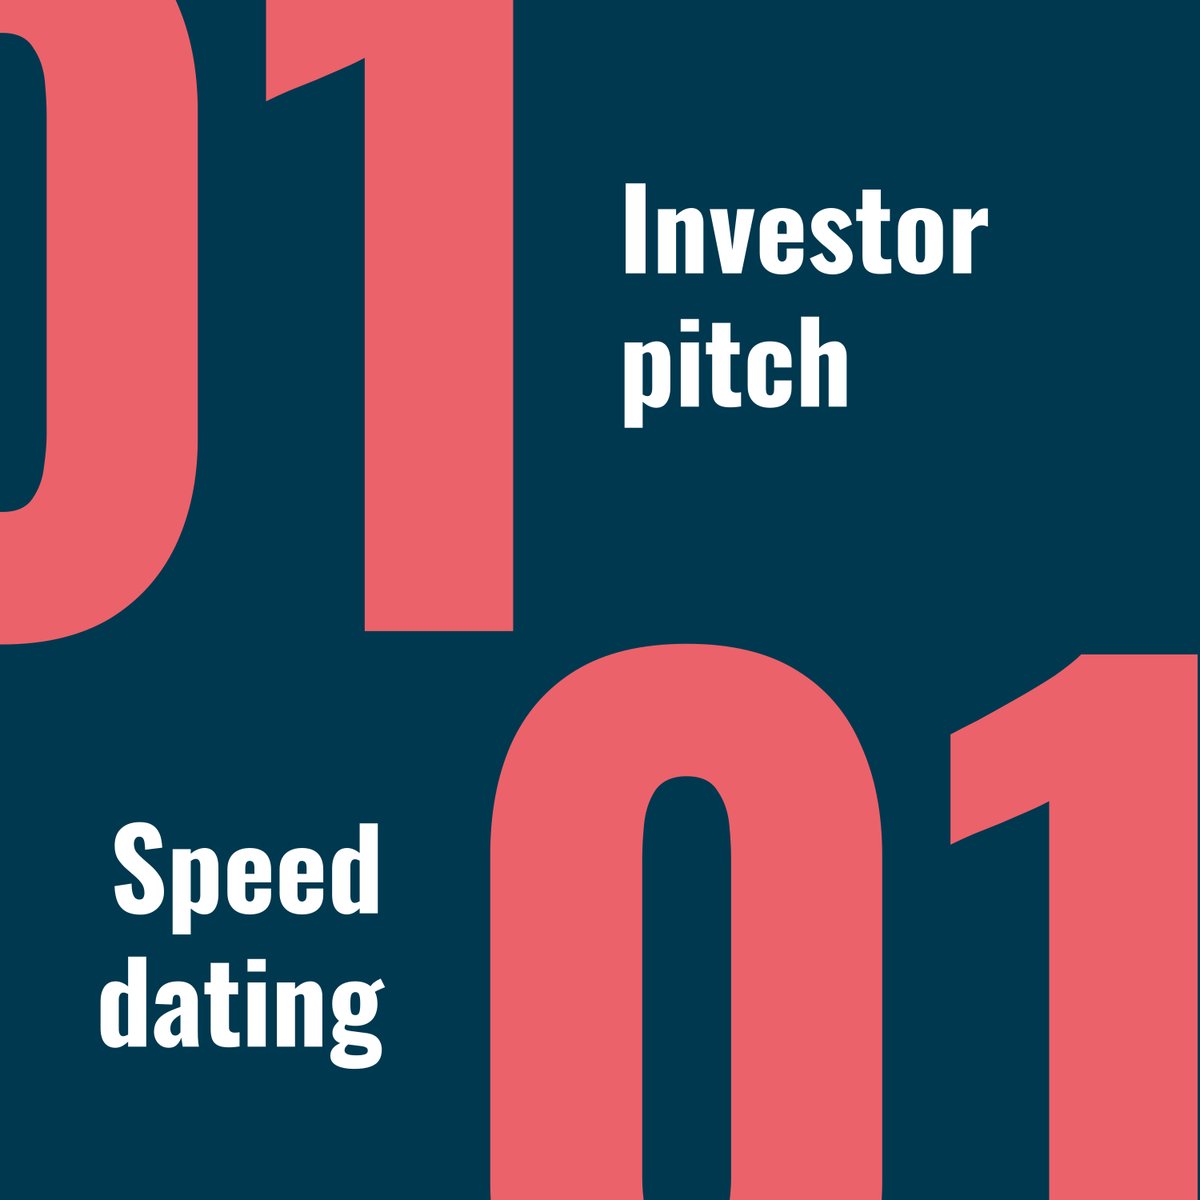 #ENGAGED Investment Conference in numbers 👇 ▫️ 34 SPEAKERS ▫️ 70 STARTUP PITCHES ▫️ 4 PANEL DISCUSSIONS ▫️ 3 KEYNOTE SPEECHES ▫️ 2 FIRESIDE CHATS ▫️ 6 WORKSHOPS ▫️ 2 ROUNDTABLES ▫️ 1 INVESTOR PITCH ▫️ 1 SPEED DATING 🔗 engaged.investments